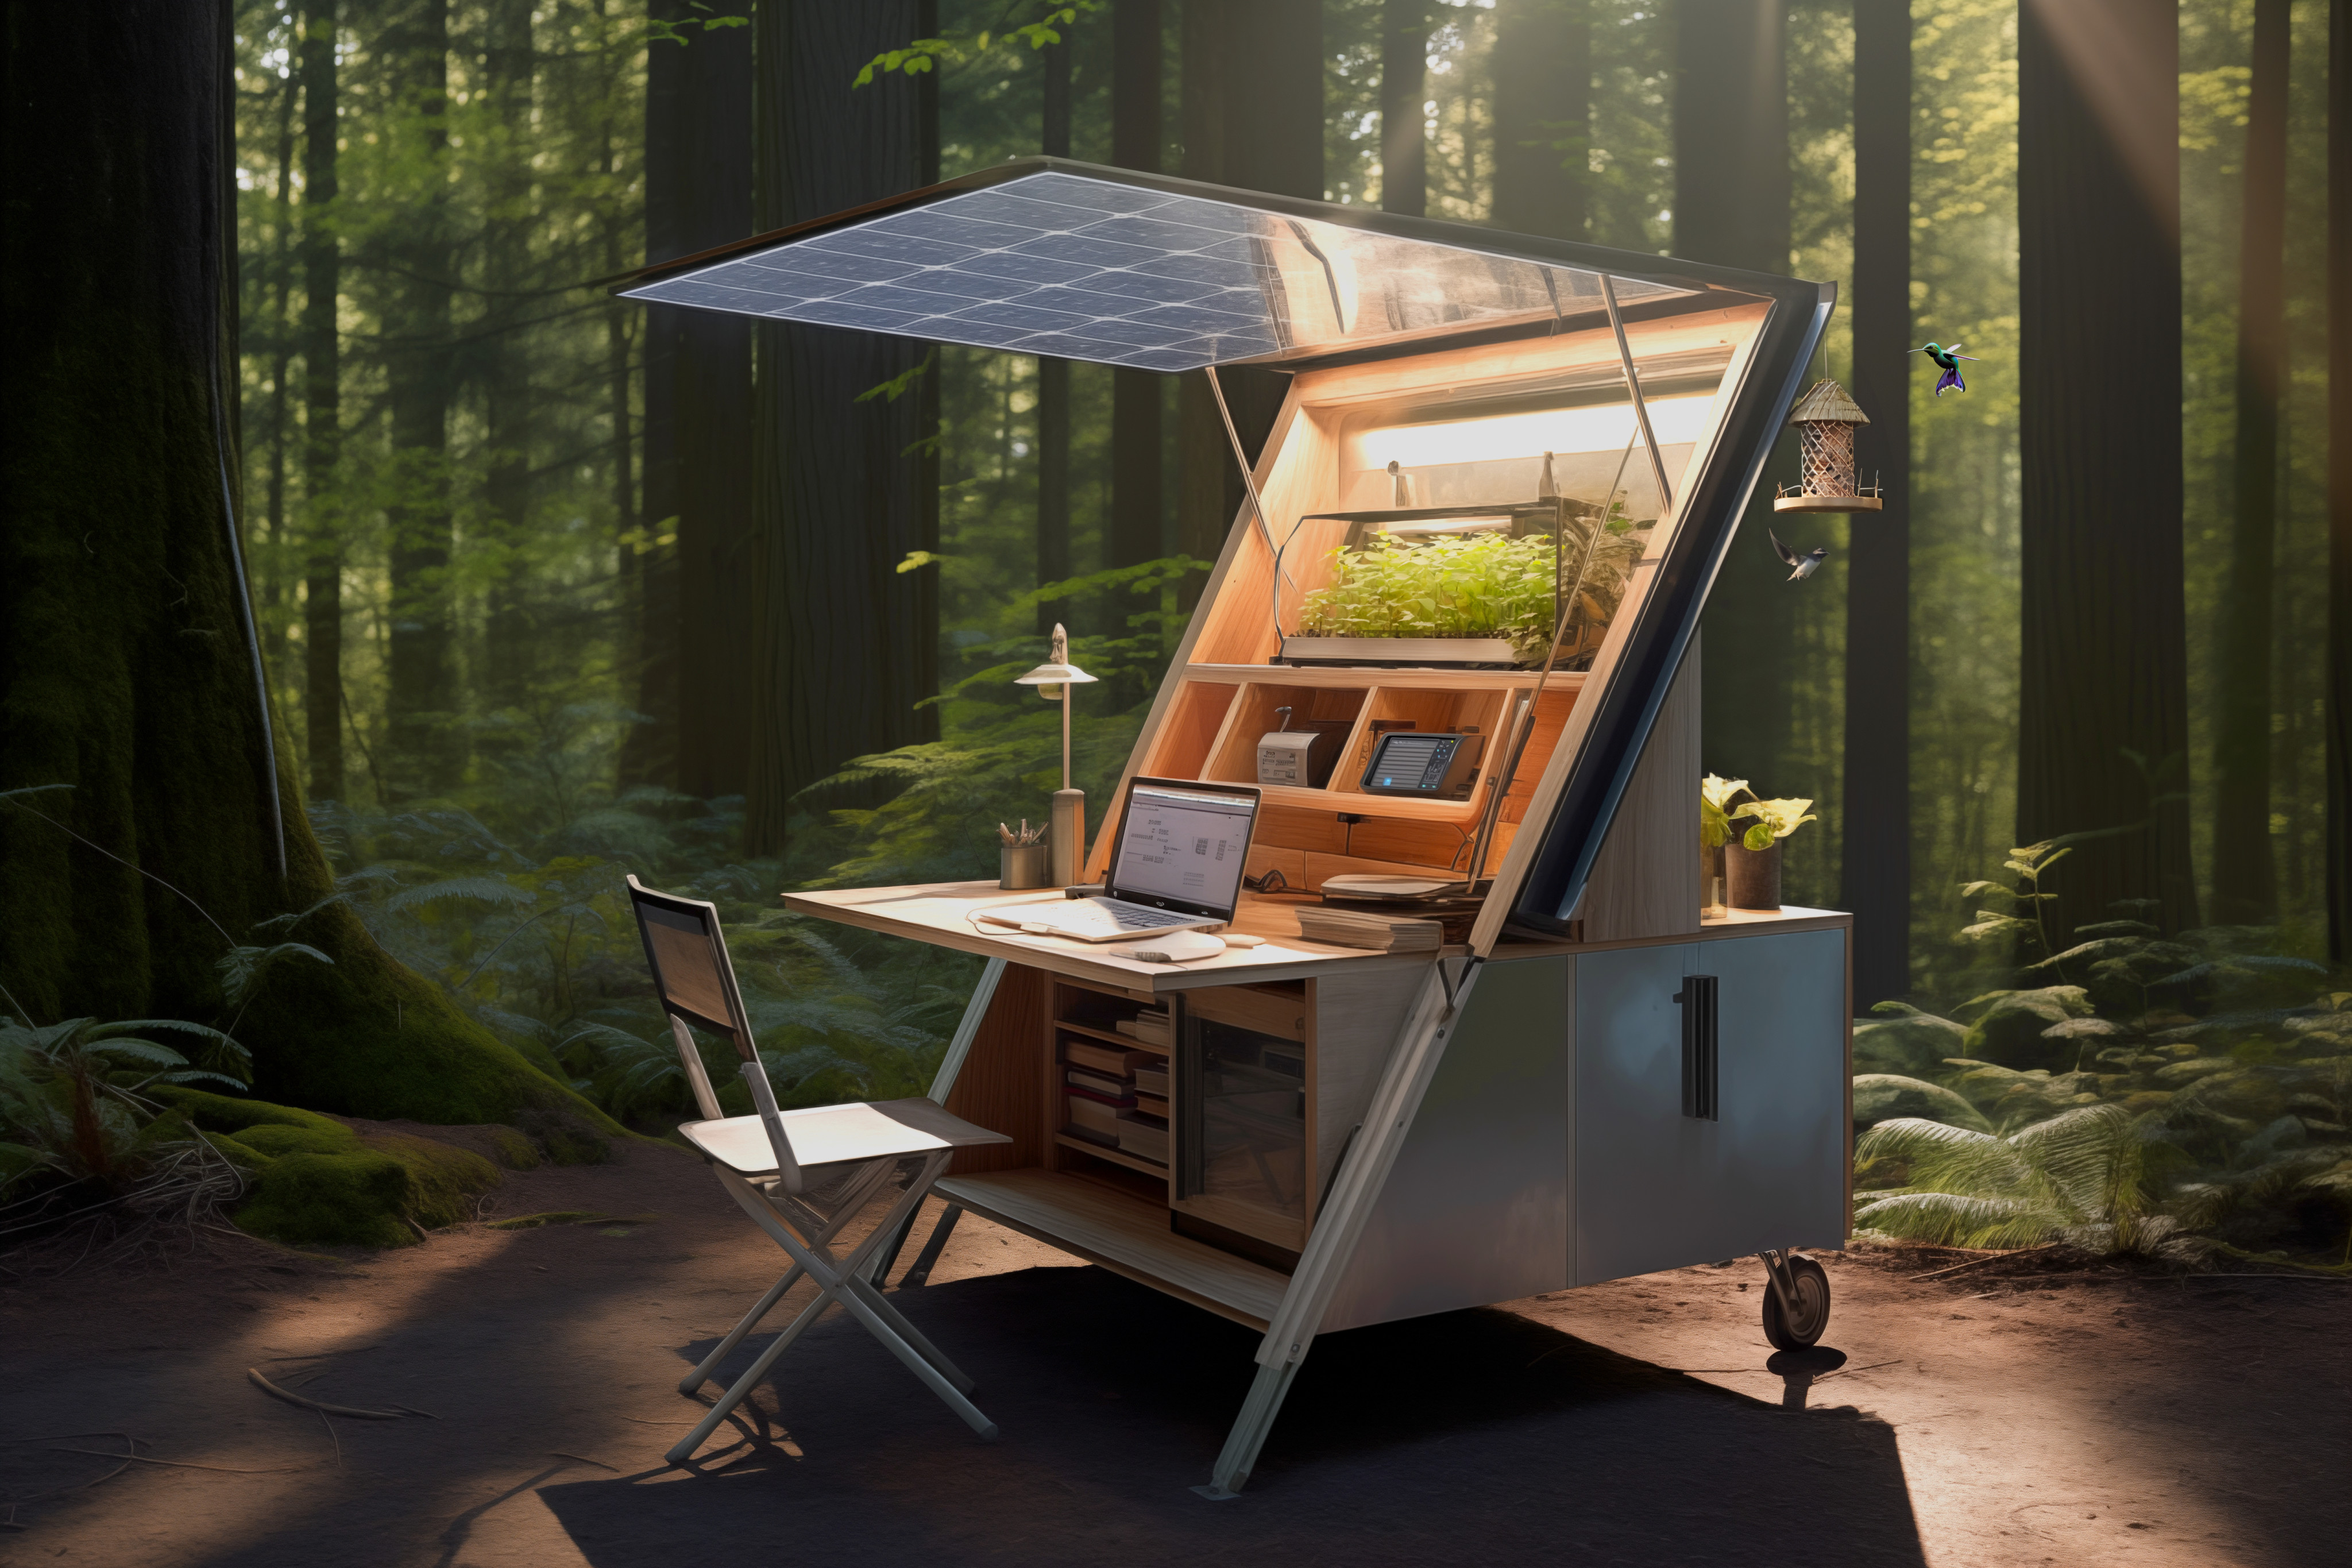 A new thing, outdoor desks can be Wi-fi enabled, with solar-powered chargers and features to protect users from the elements. Photo: Felipe Pacheco for WGSN